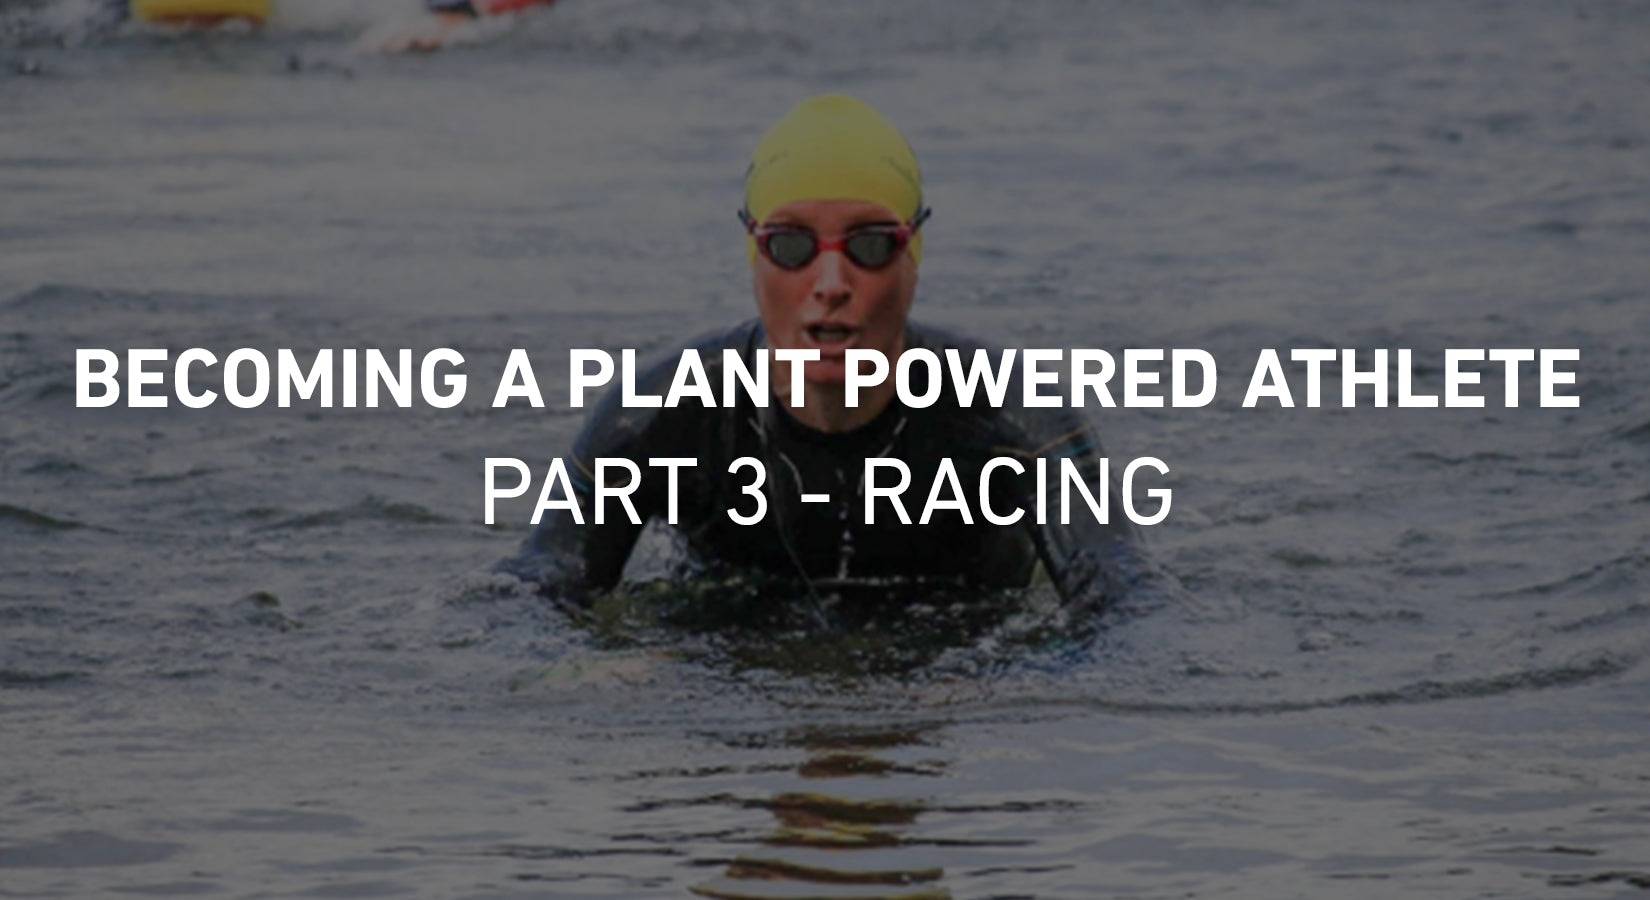 Becoming a Plant Powered Athlete - Part 3: Racing by Camille King